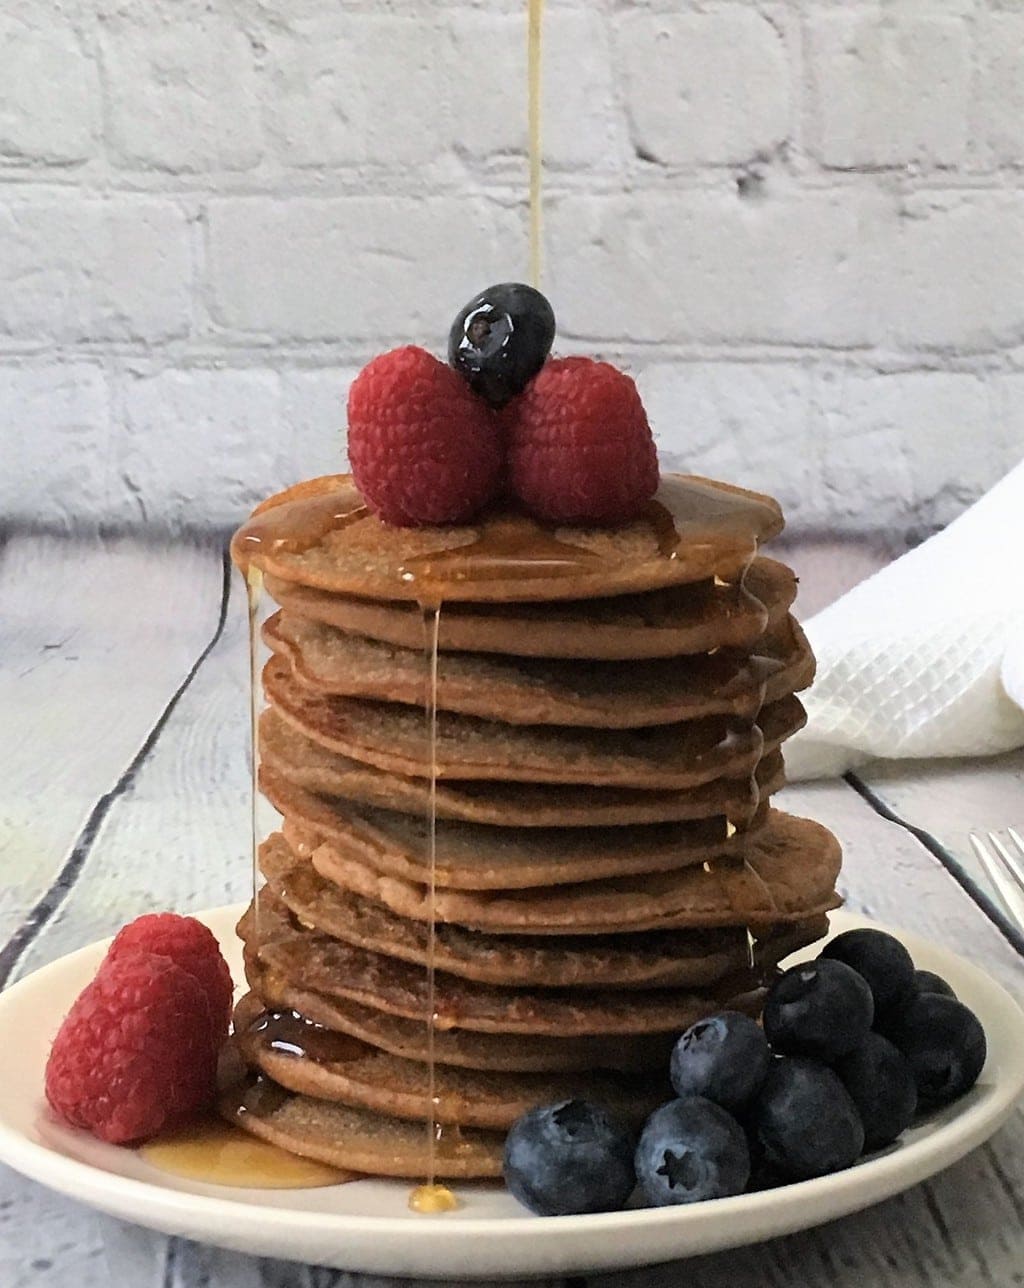 Lentil banana pancakes stacked with berries and syrup pouring over the top.